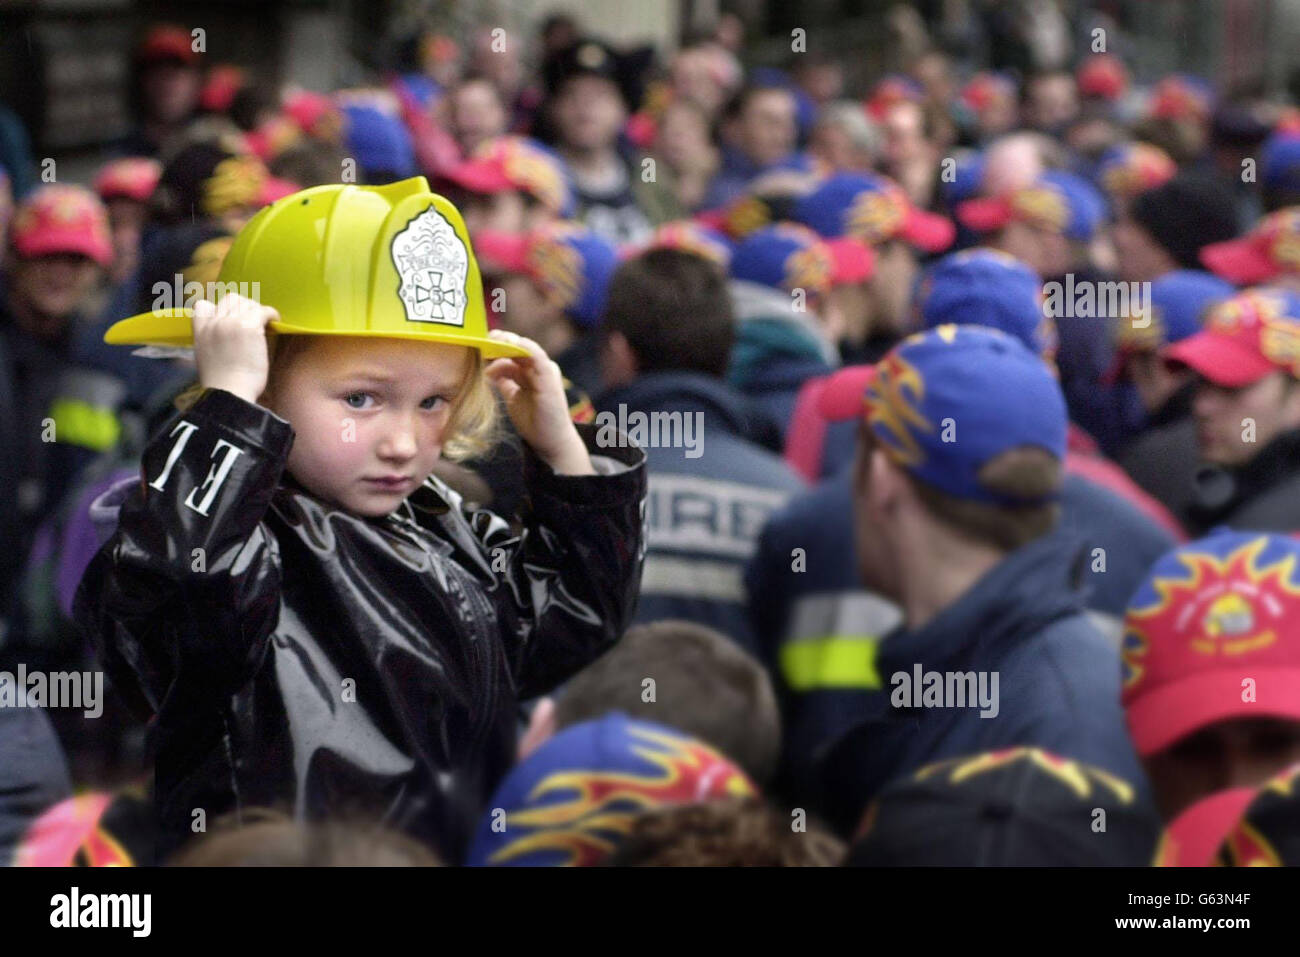 Firefighters gather for a meeting in Edinburgh with Andy Gilchrist, general secretary of the FBU. Eva Silverstone, 3, from Edinburgh is held up above the crowd. Stock Photo